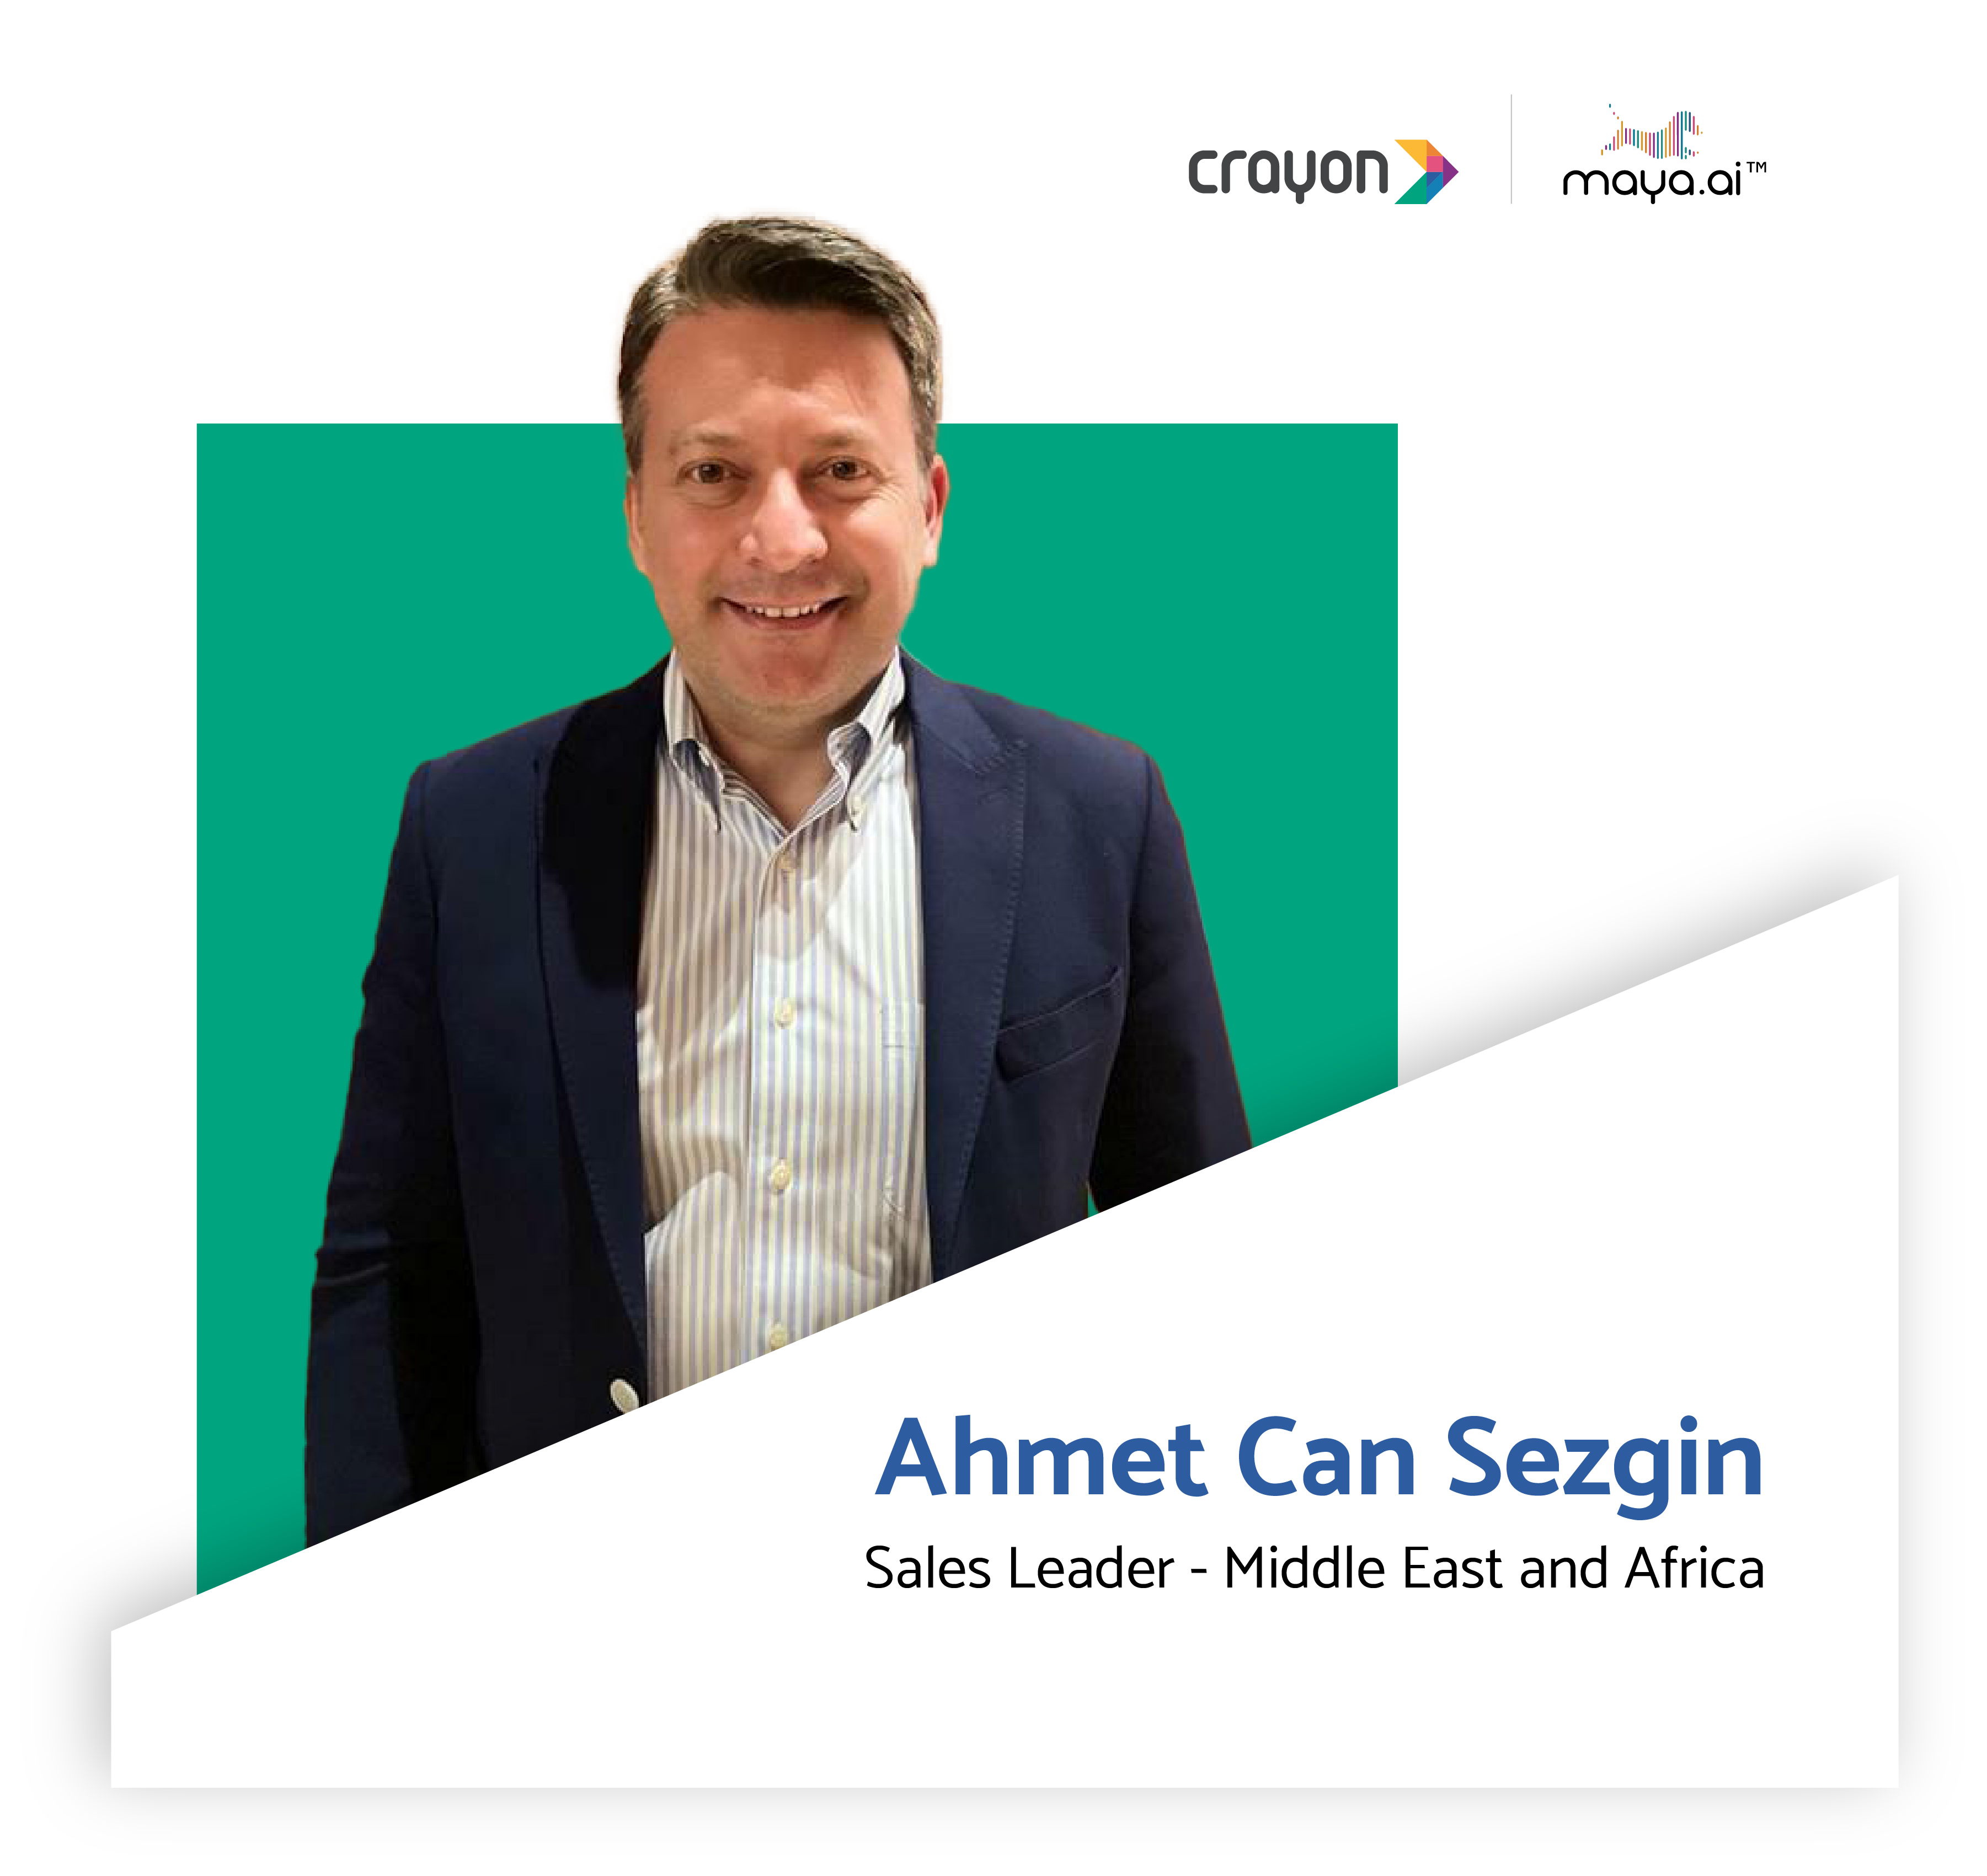 Ahmet Can Sezgin joins Crayon Data as Sales Leader for Middle East and Africa